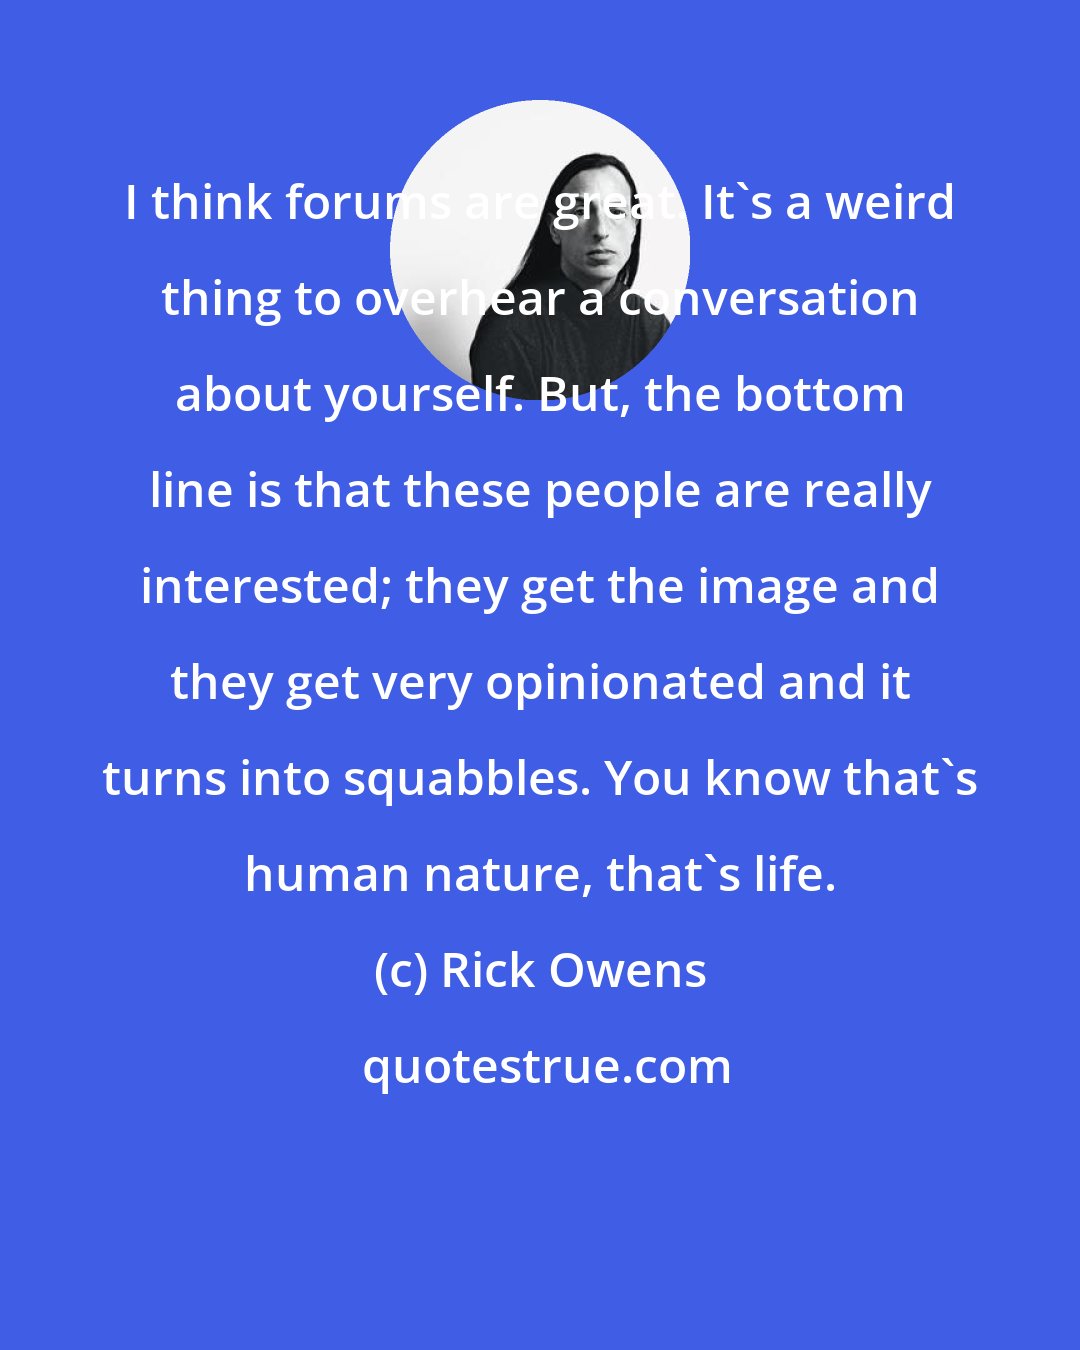 Rick Owens: I think forums are great. It's a weird thing to overhear a conversation about yourself. But, the bottom line is that these people are really interested; they get the image and they get very opinionated and it turns into squabbles. You know that's human nature, that's life.